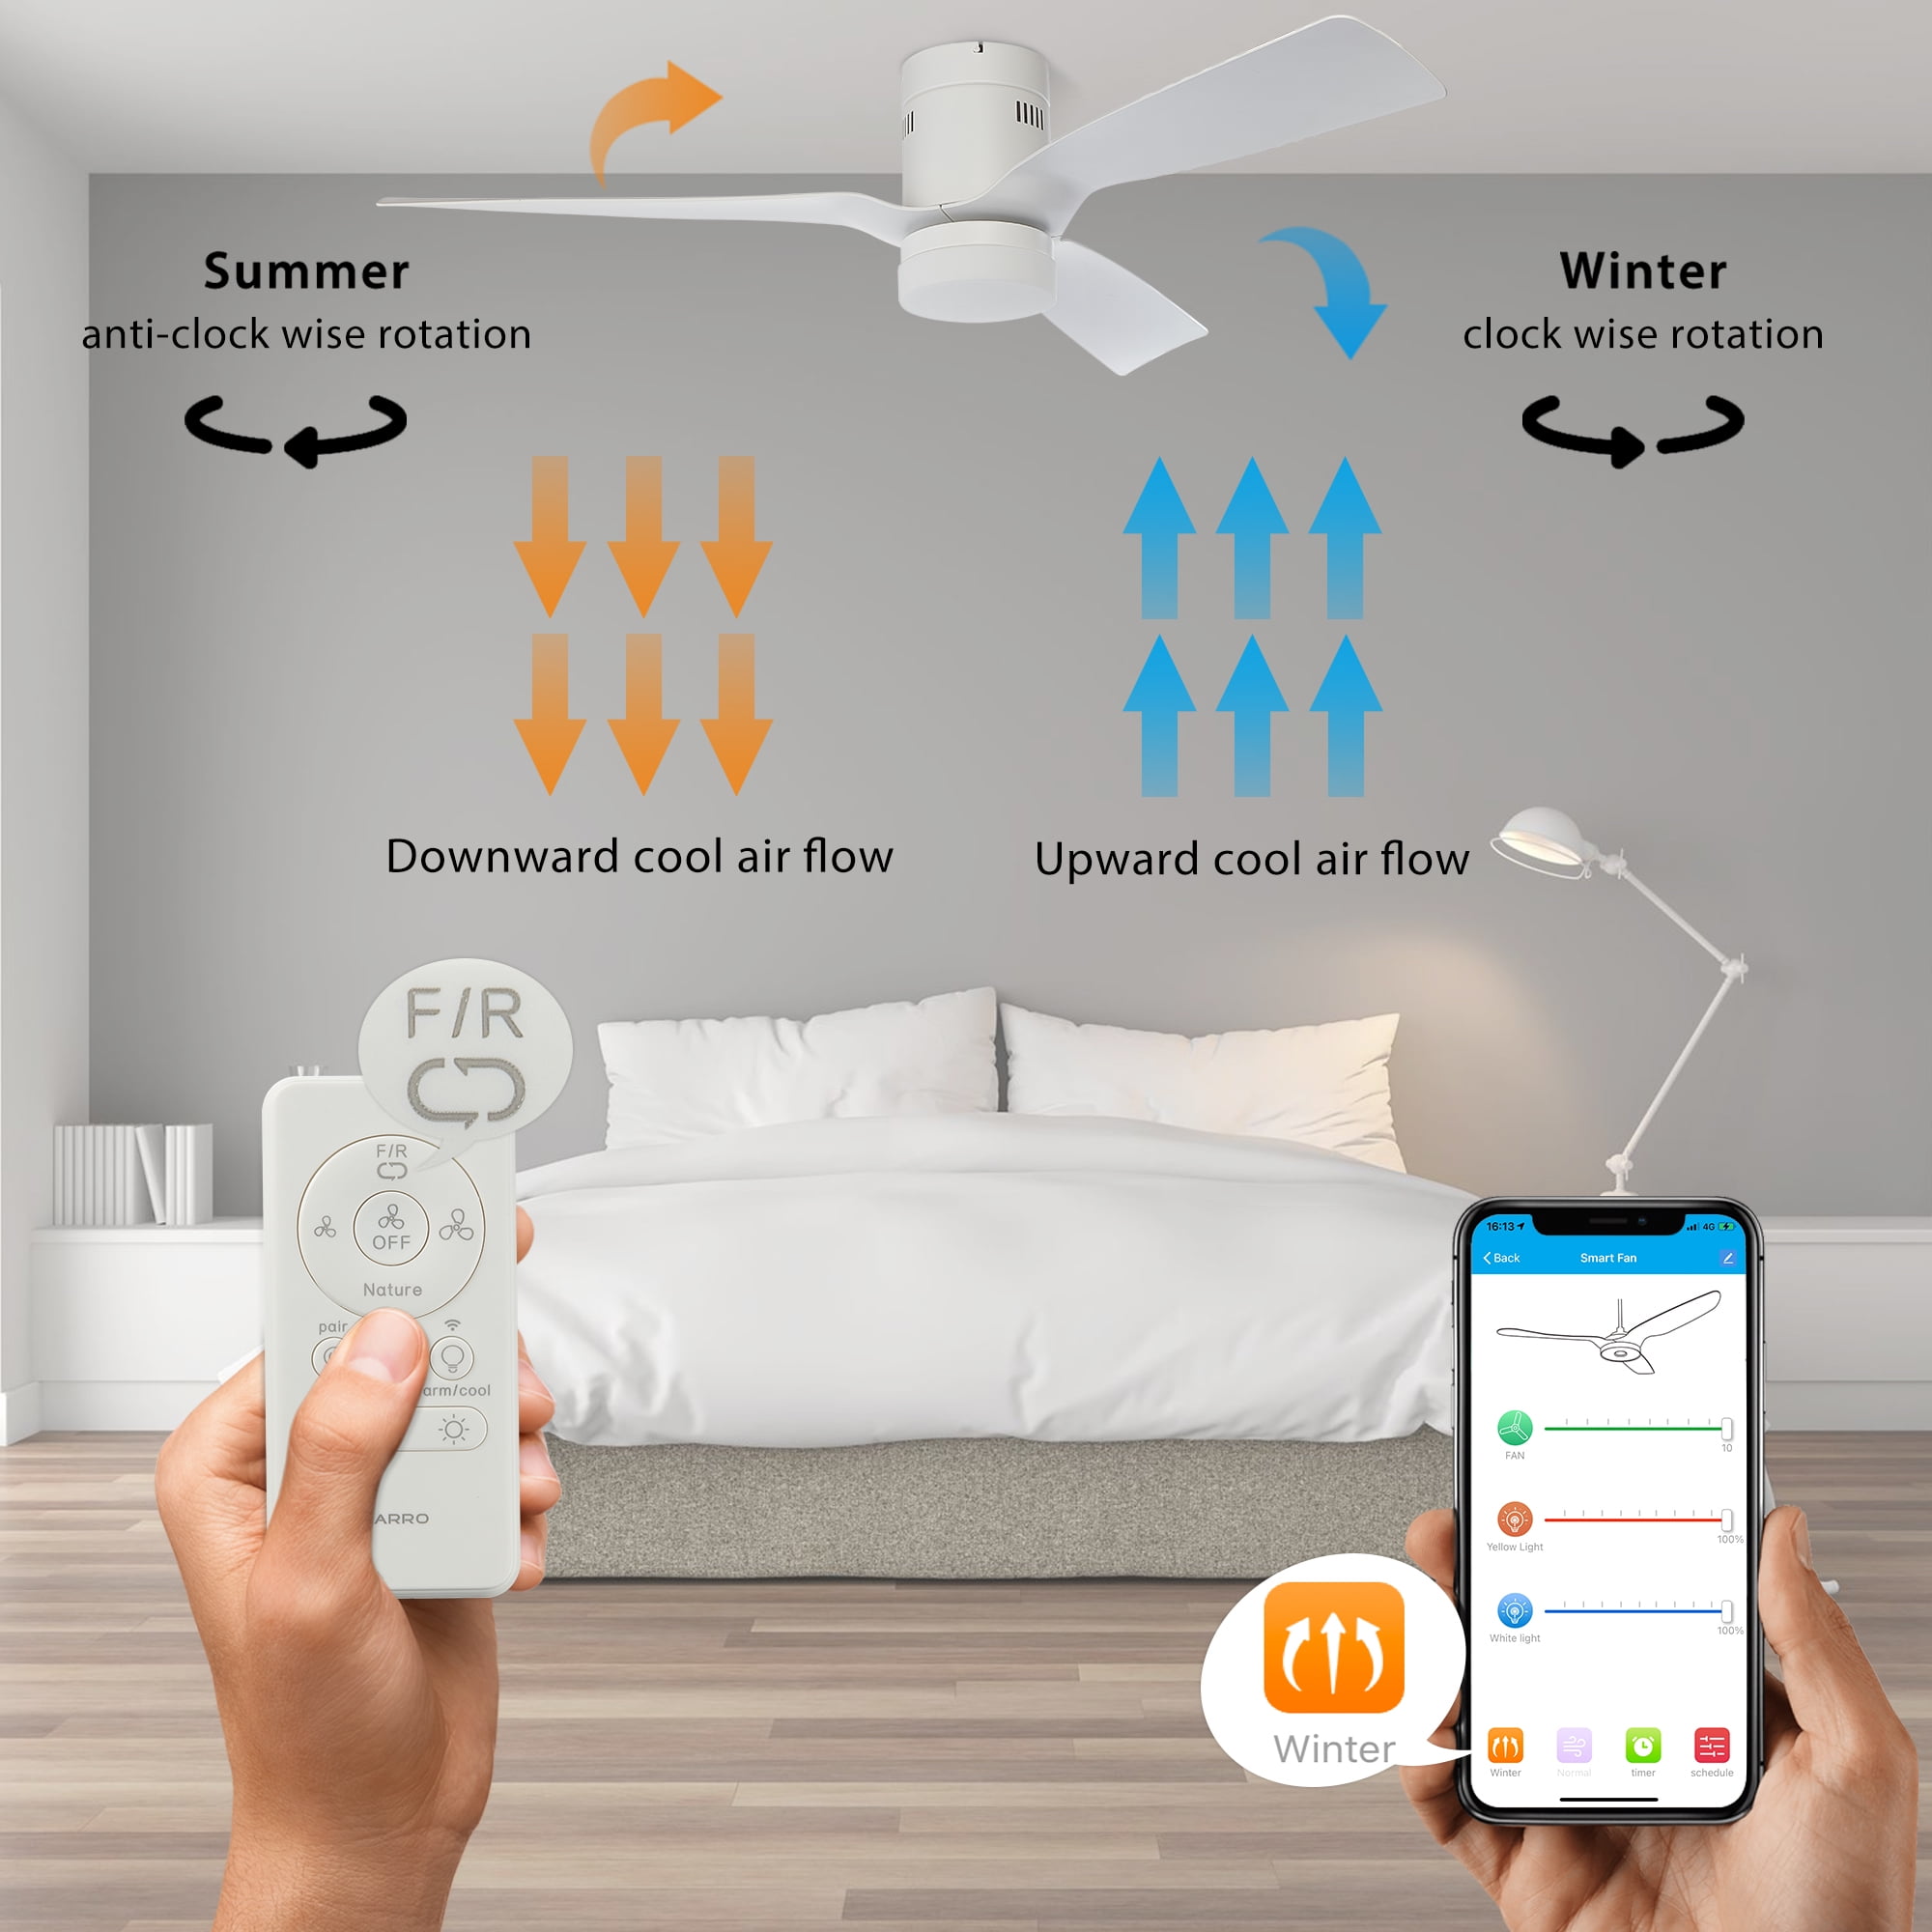 Topeka Low Profile Smart Ceiling Fan with LED Light and Remote 52 inch